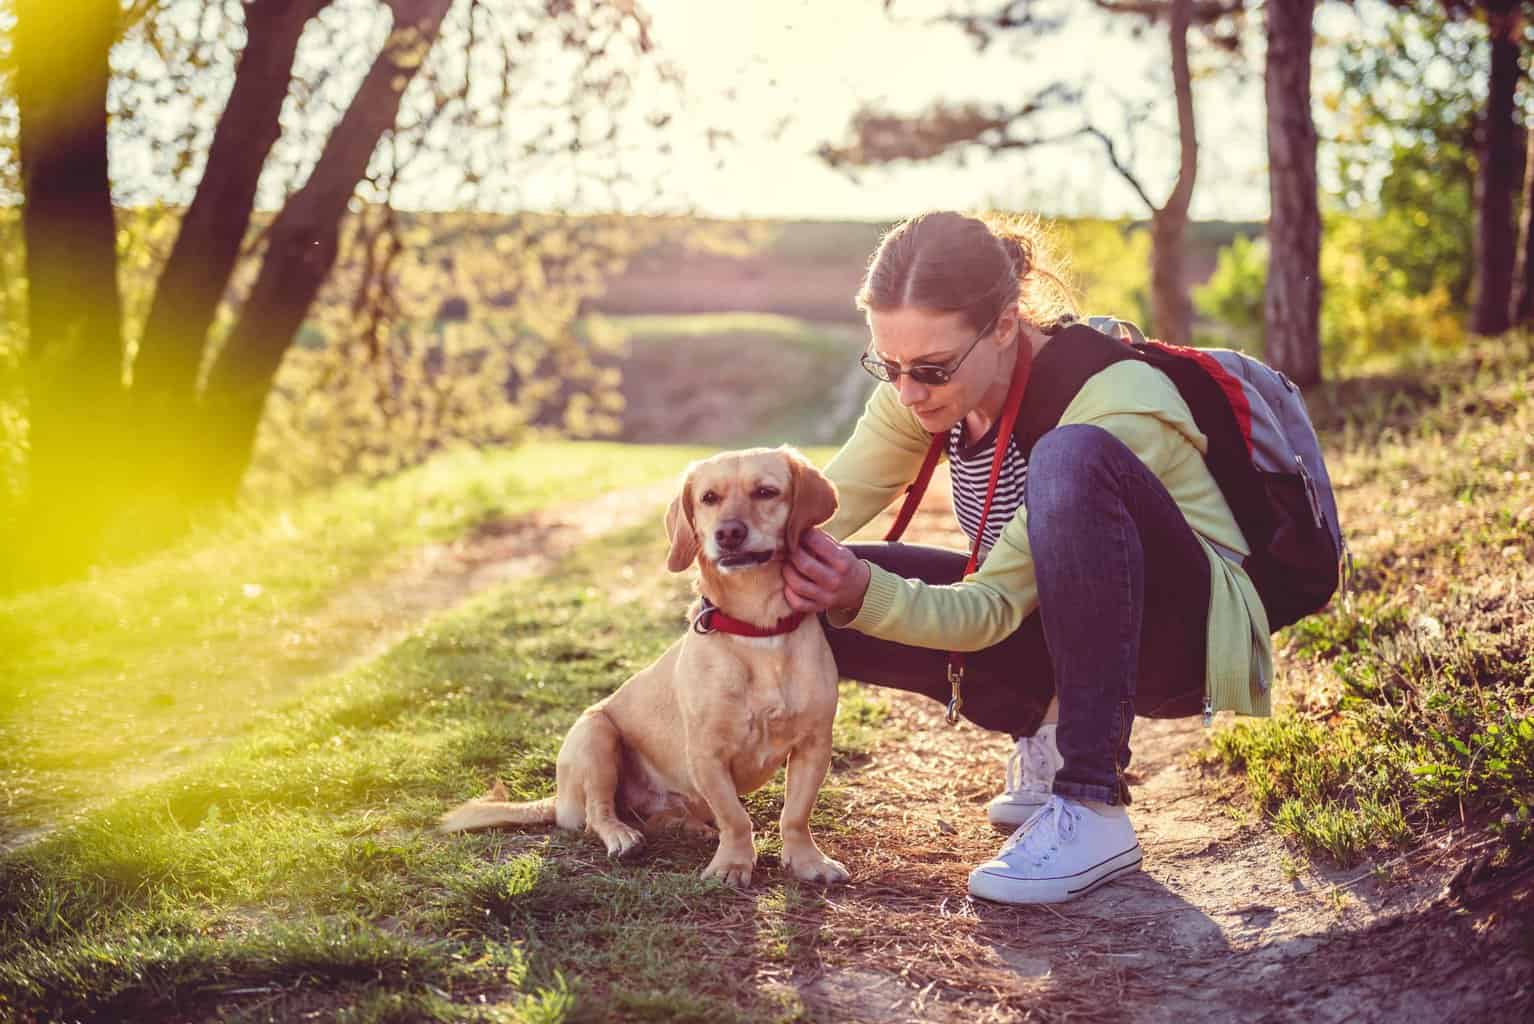 Woman checks dog for ticks. If you find ticks, use our tips for at-home tick removal.